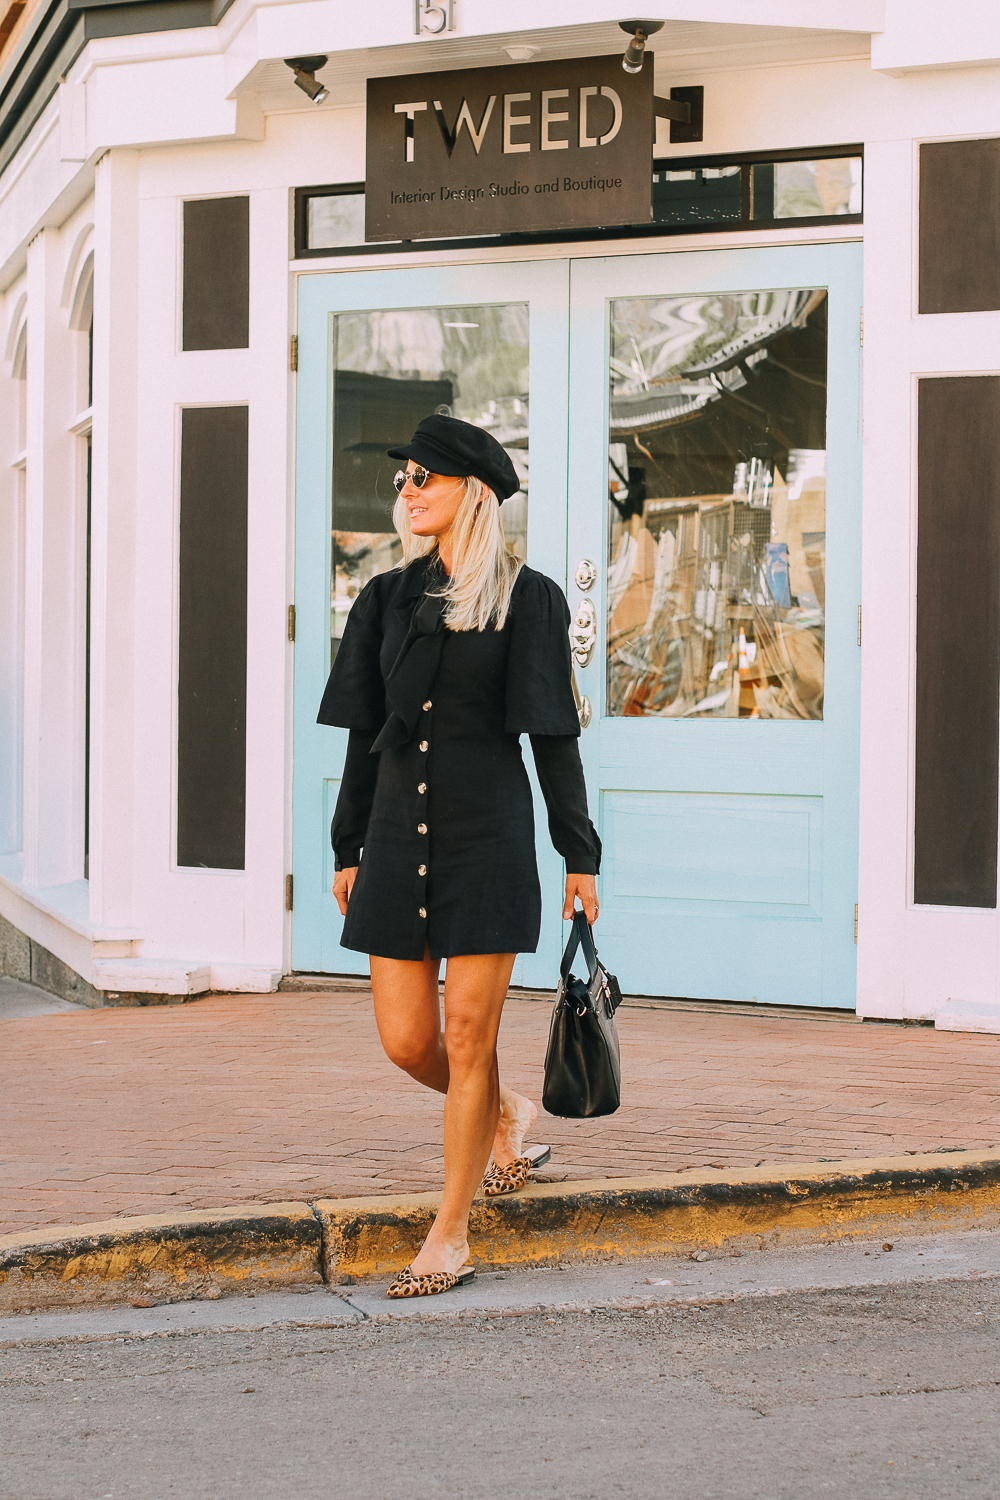 Vegan Leather Handbag by Sole Society paired with black Topshop dress, bow blouse, and newsboy cap on fashion blogger Erin Busbee of BusbeeStyle.com in Telluride, Colorado with small Quay sunglasses